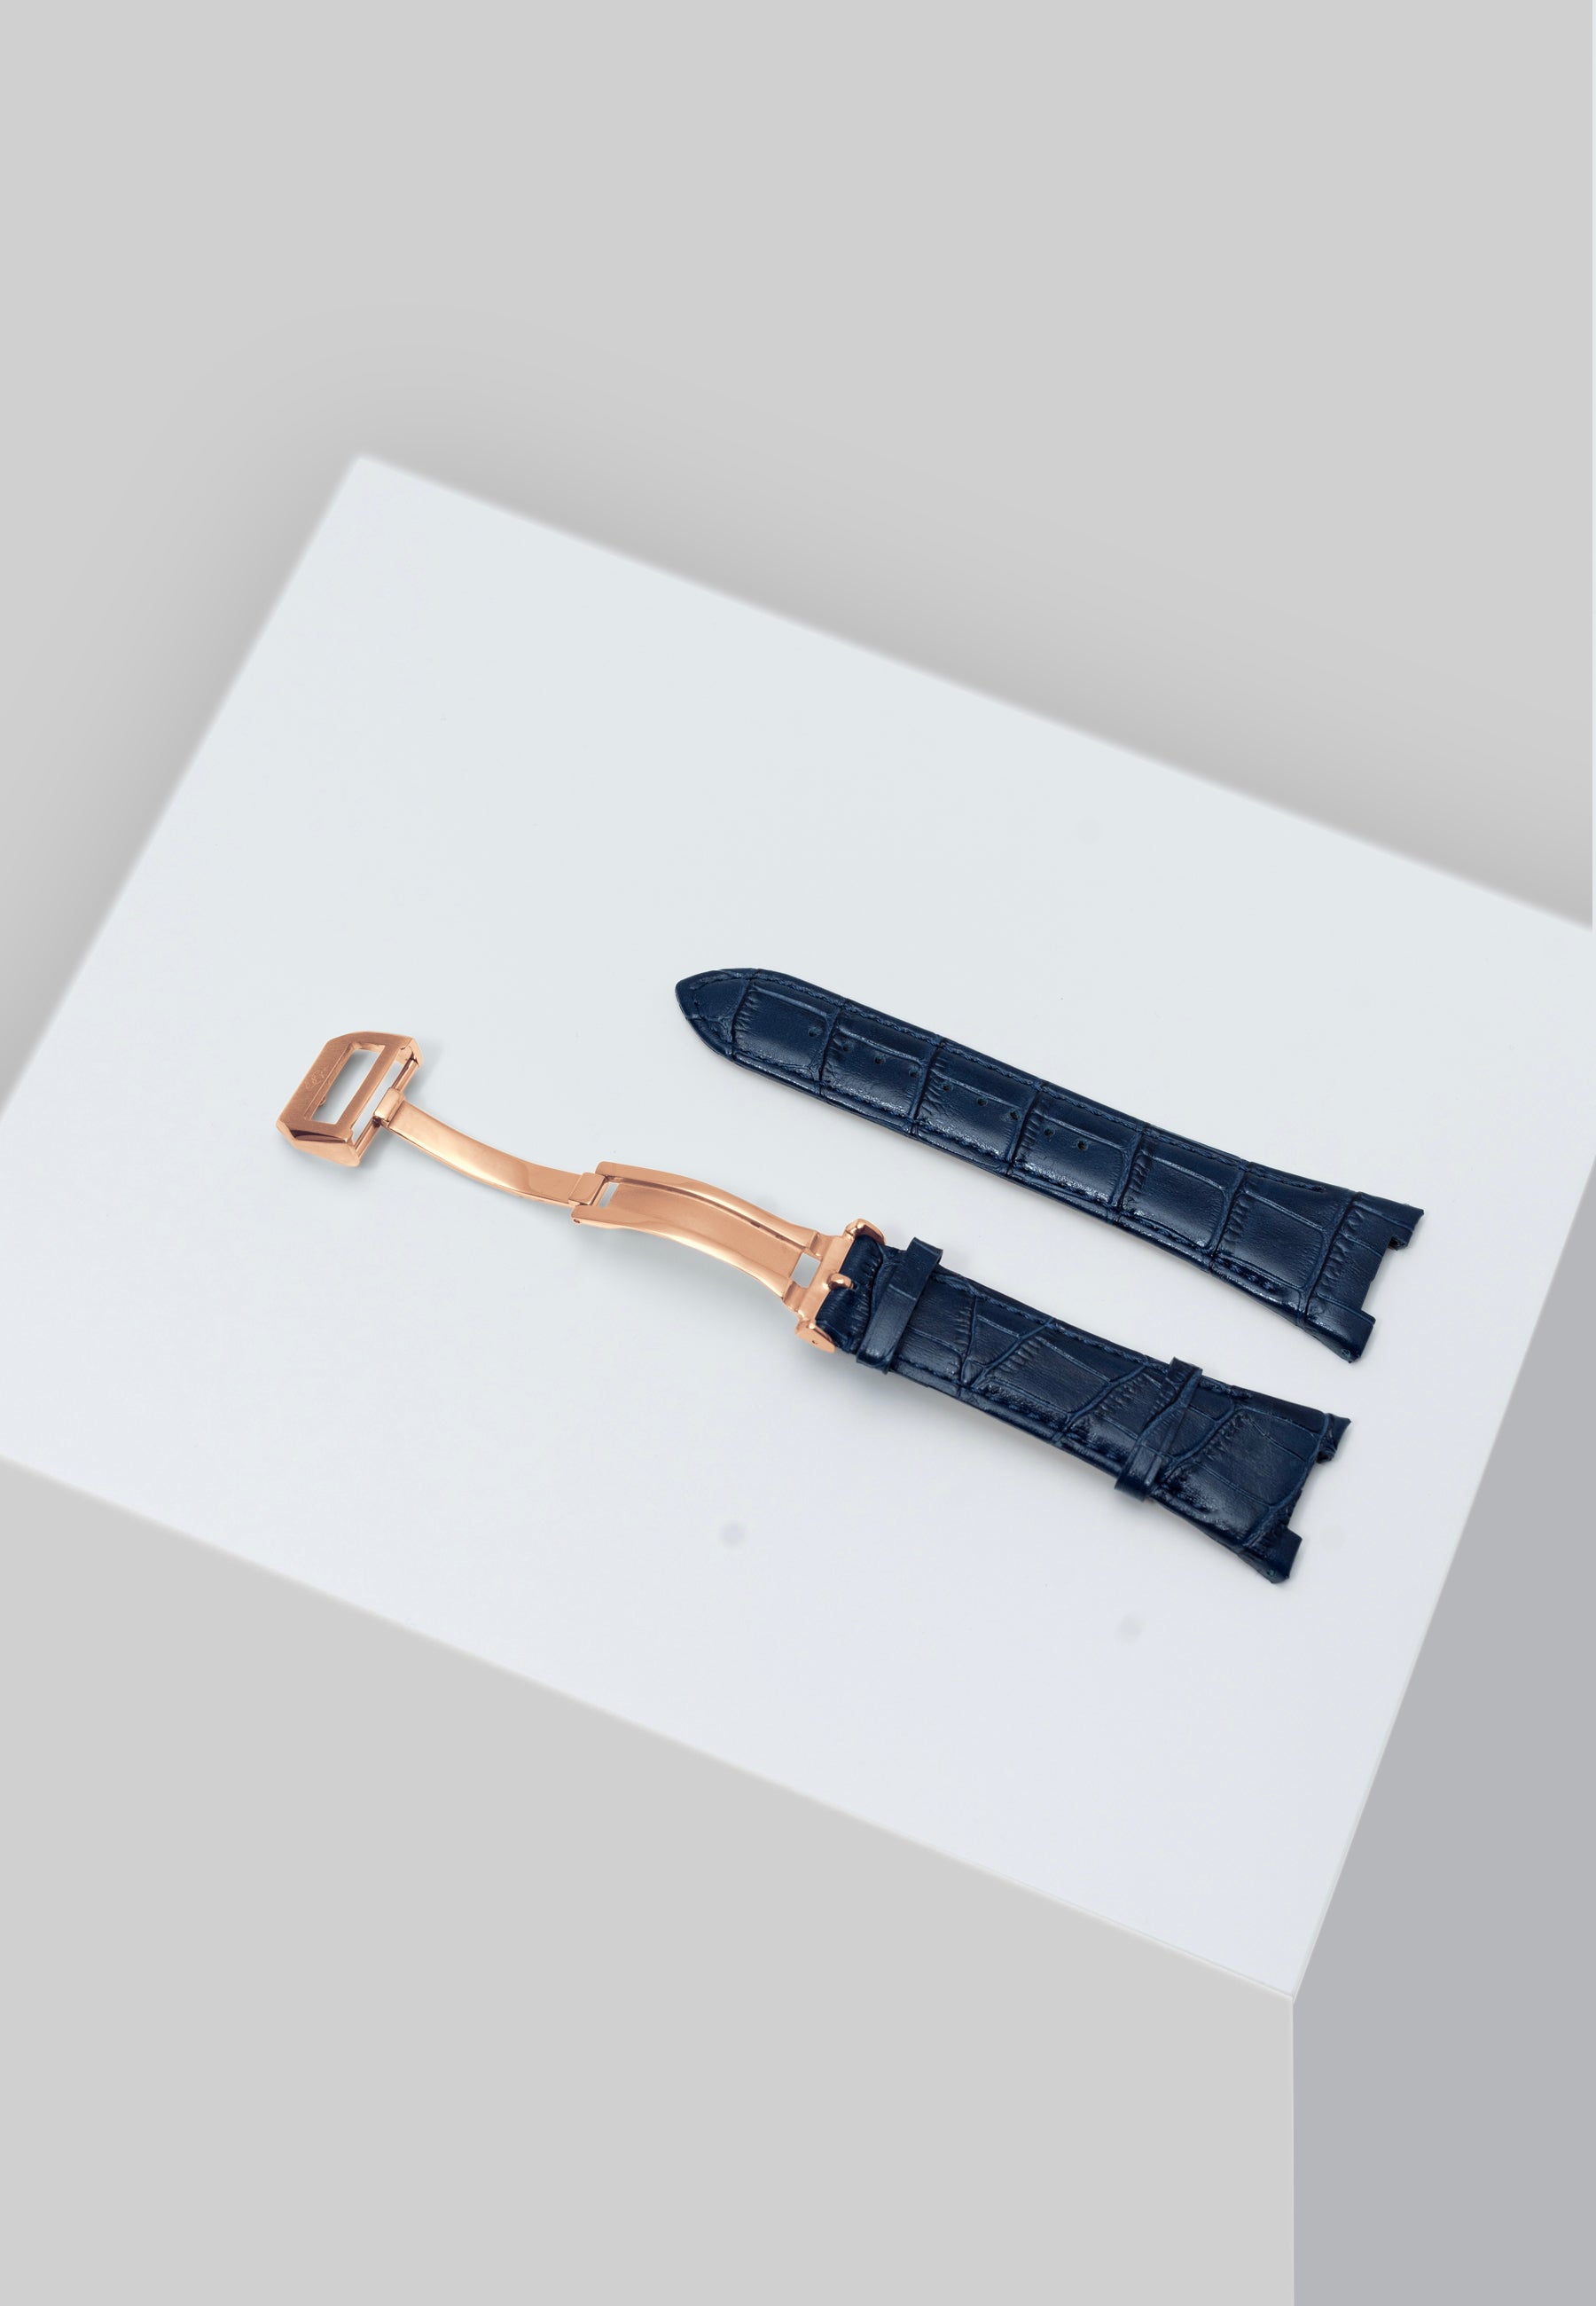 Golden Concept - Watch Straps - Leather - Rose gold buckle (Blue Leather)